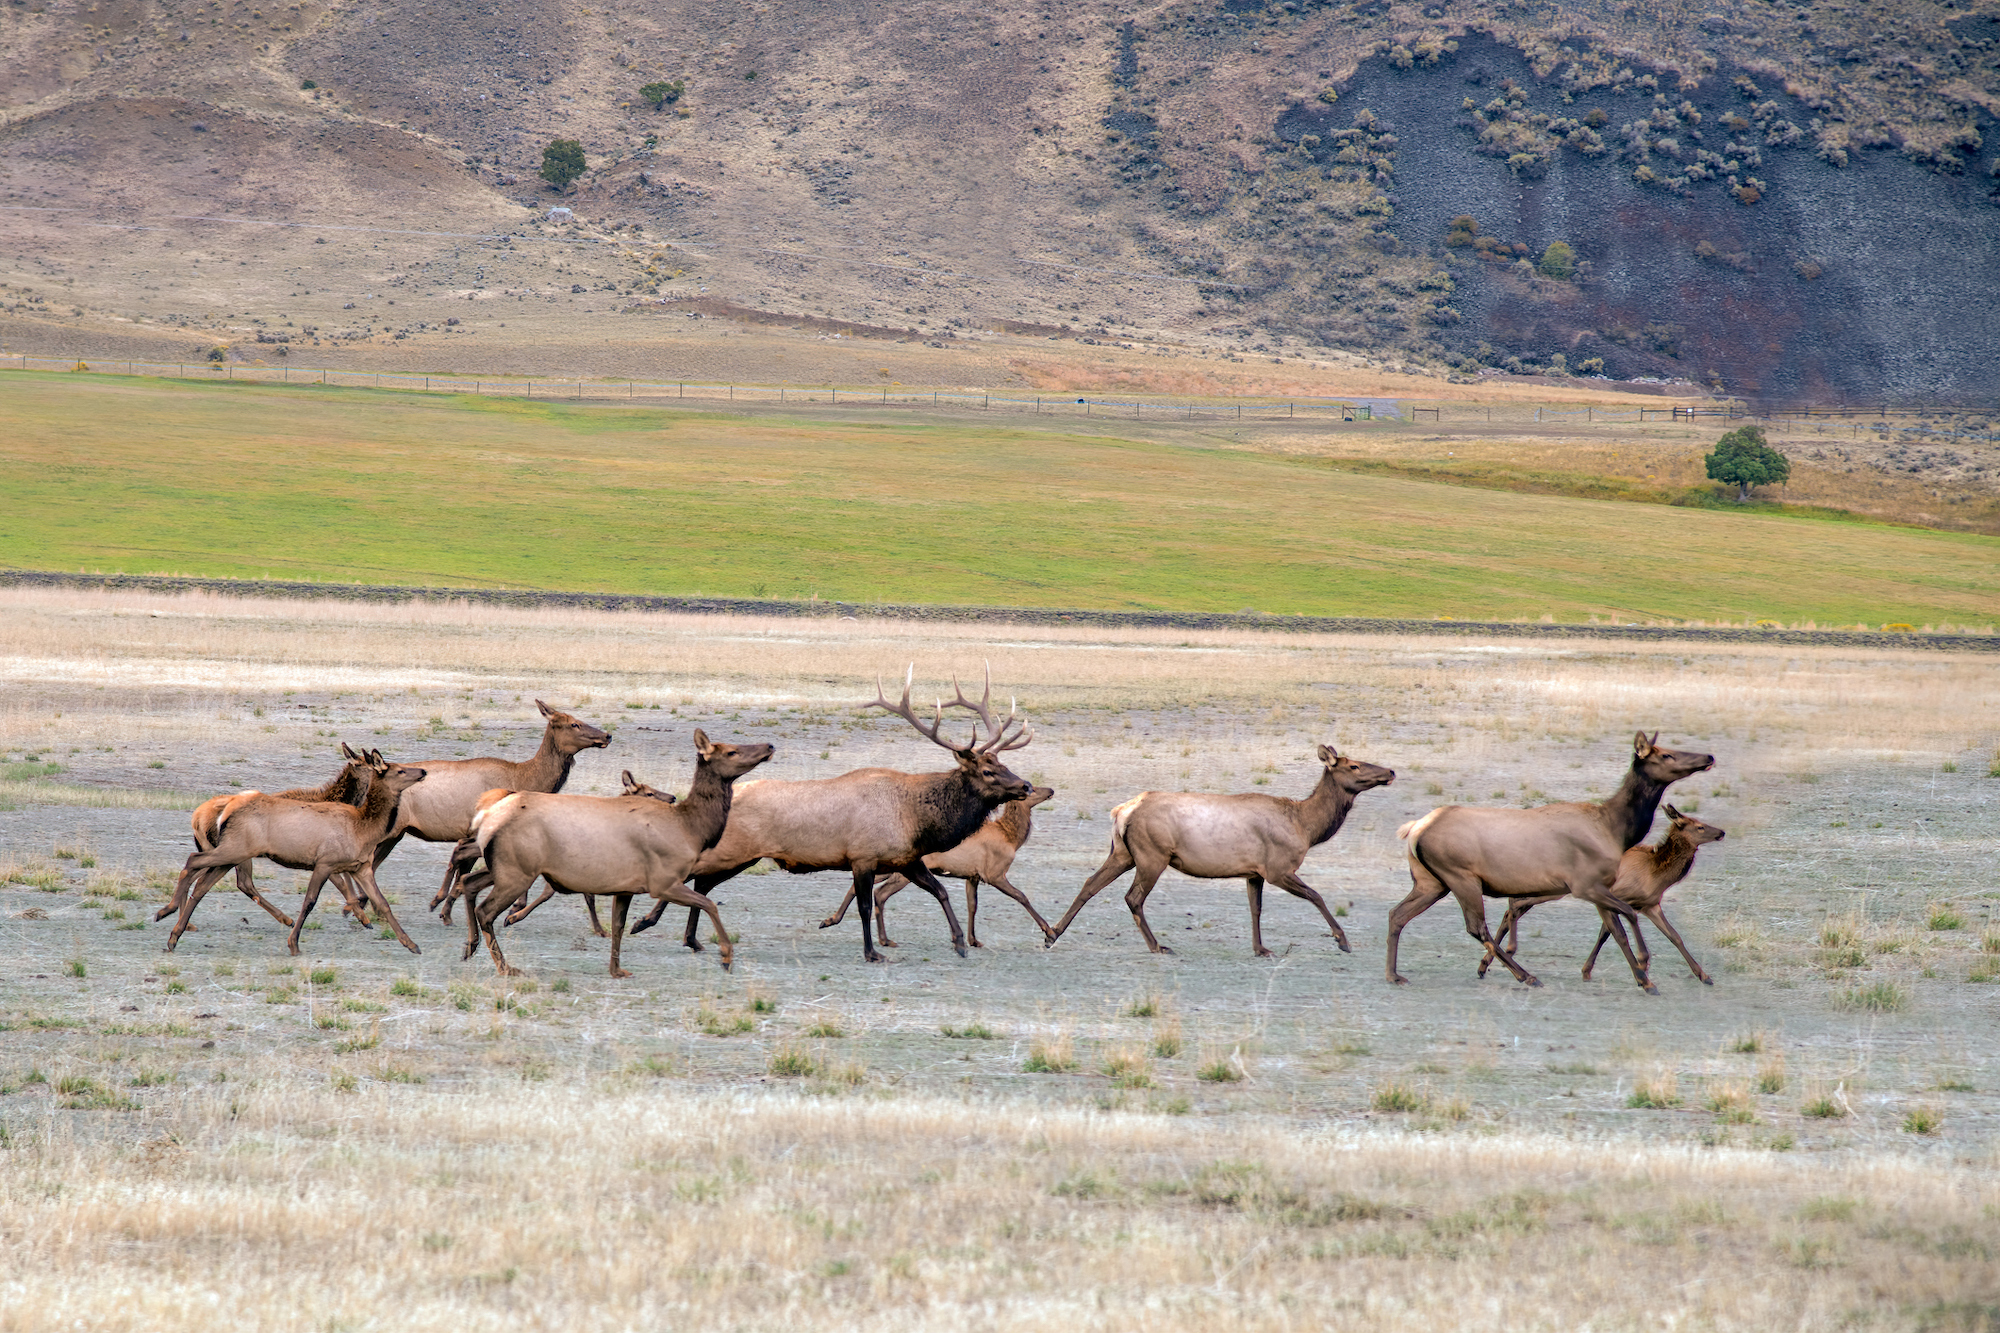 wyoming proposal unlimited elk permits for ranchers